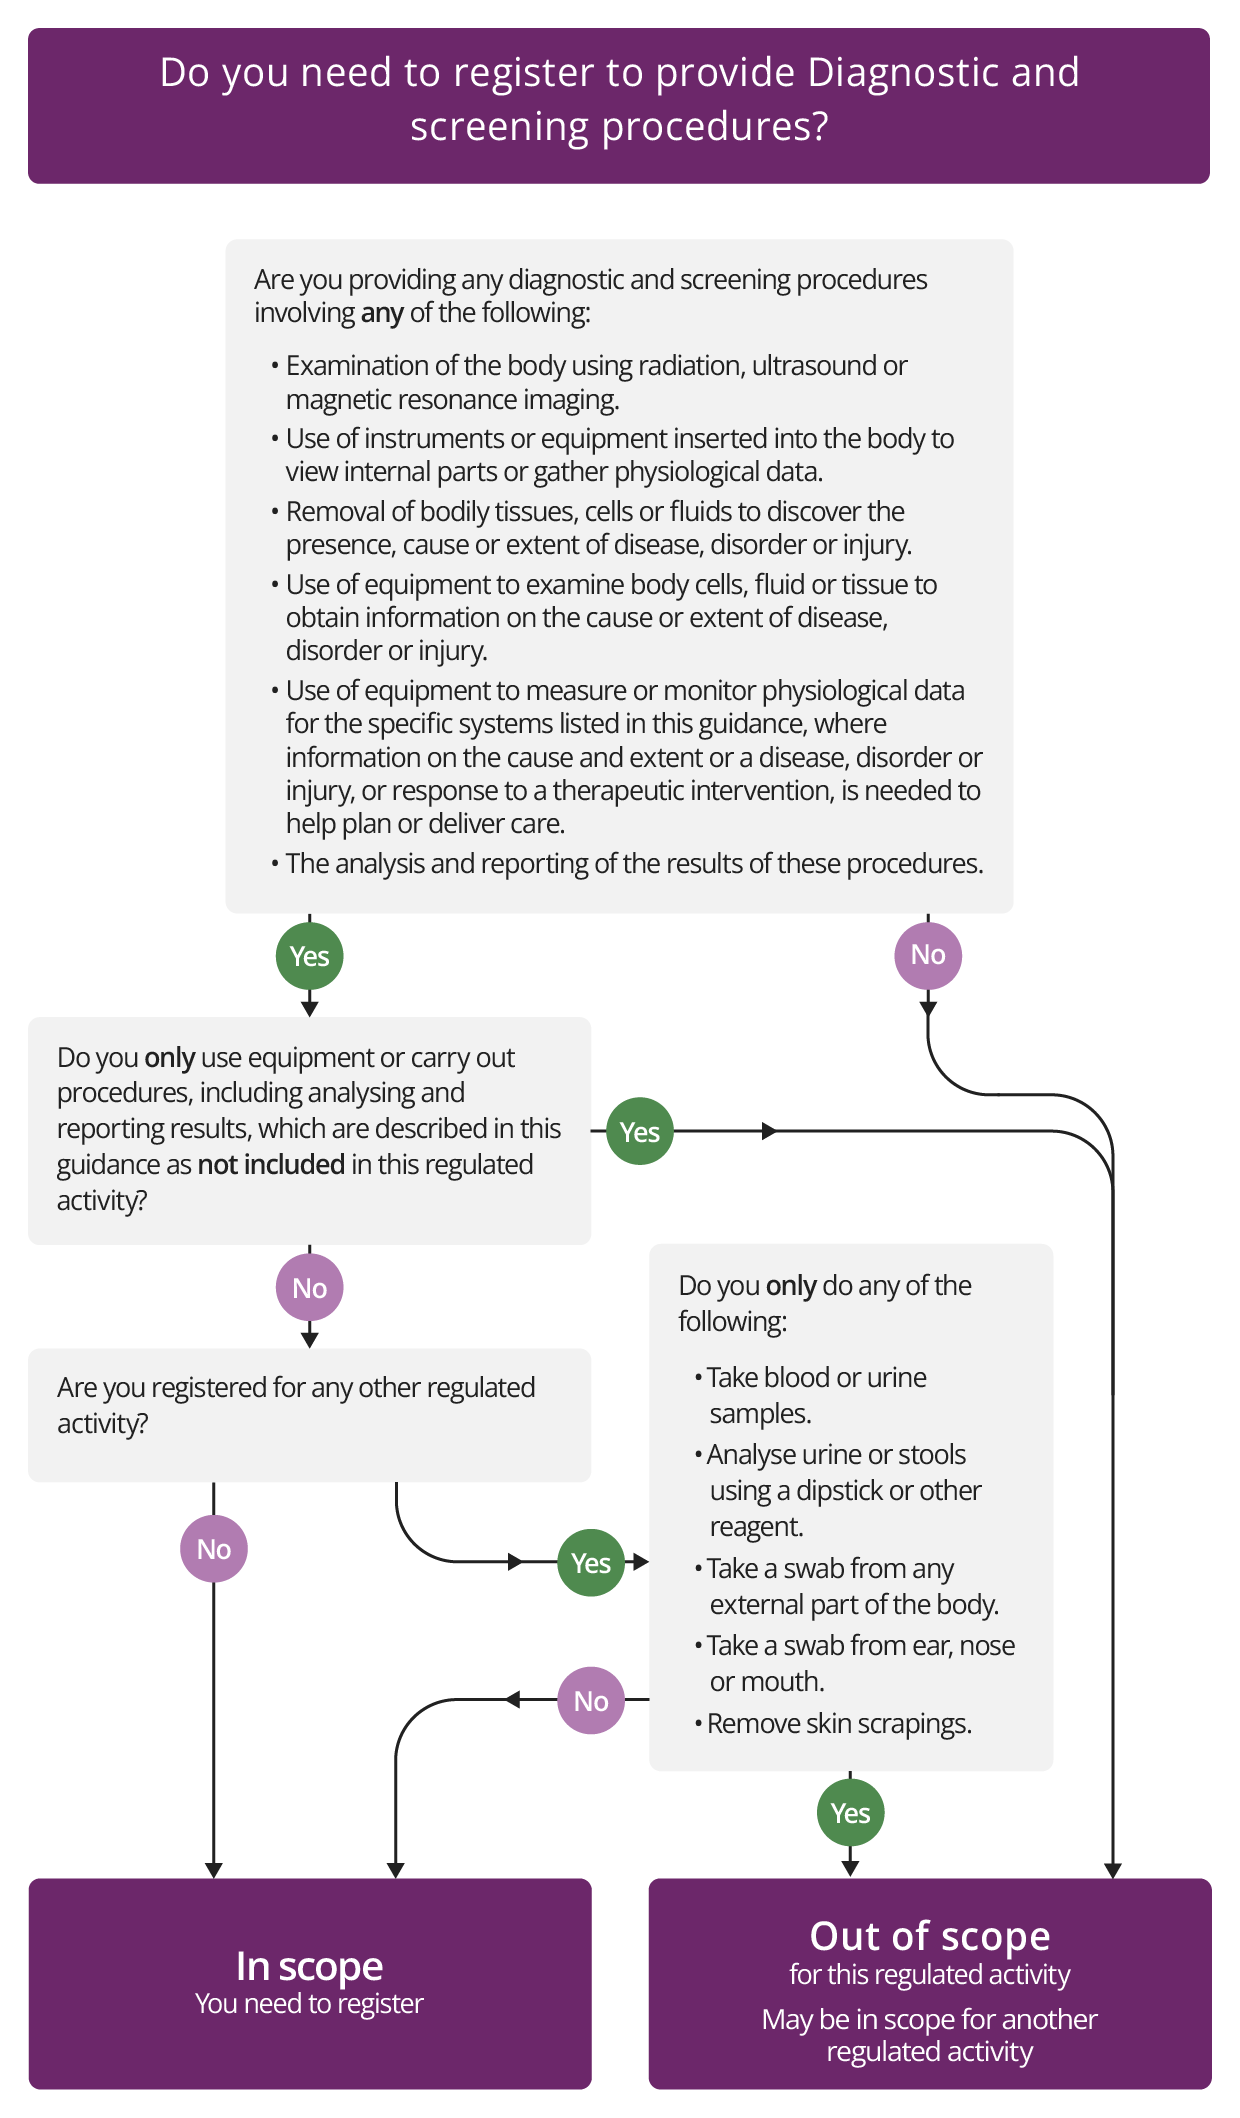 Diagram alternative to the written guidance for Diagnostic and screening procedures